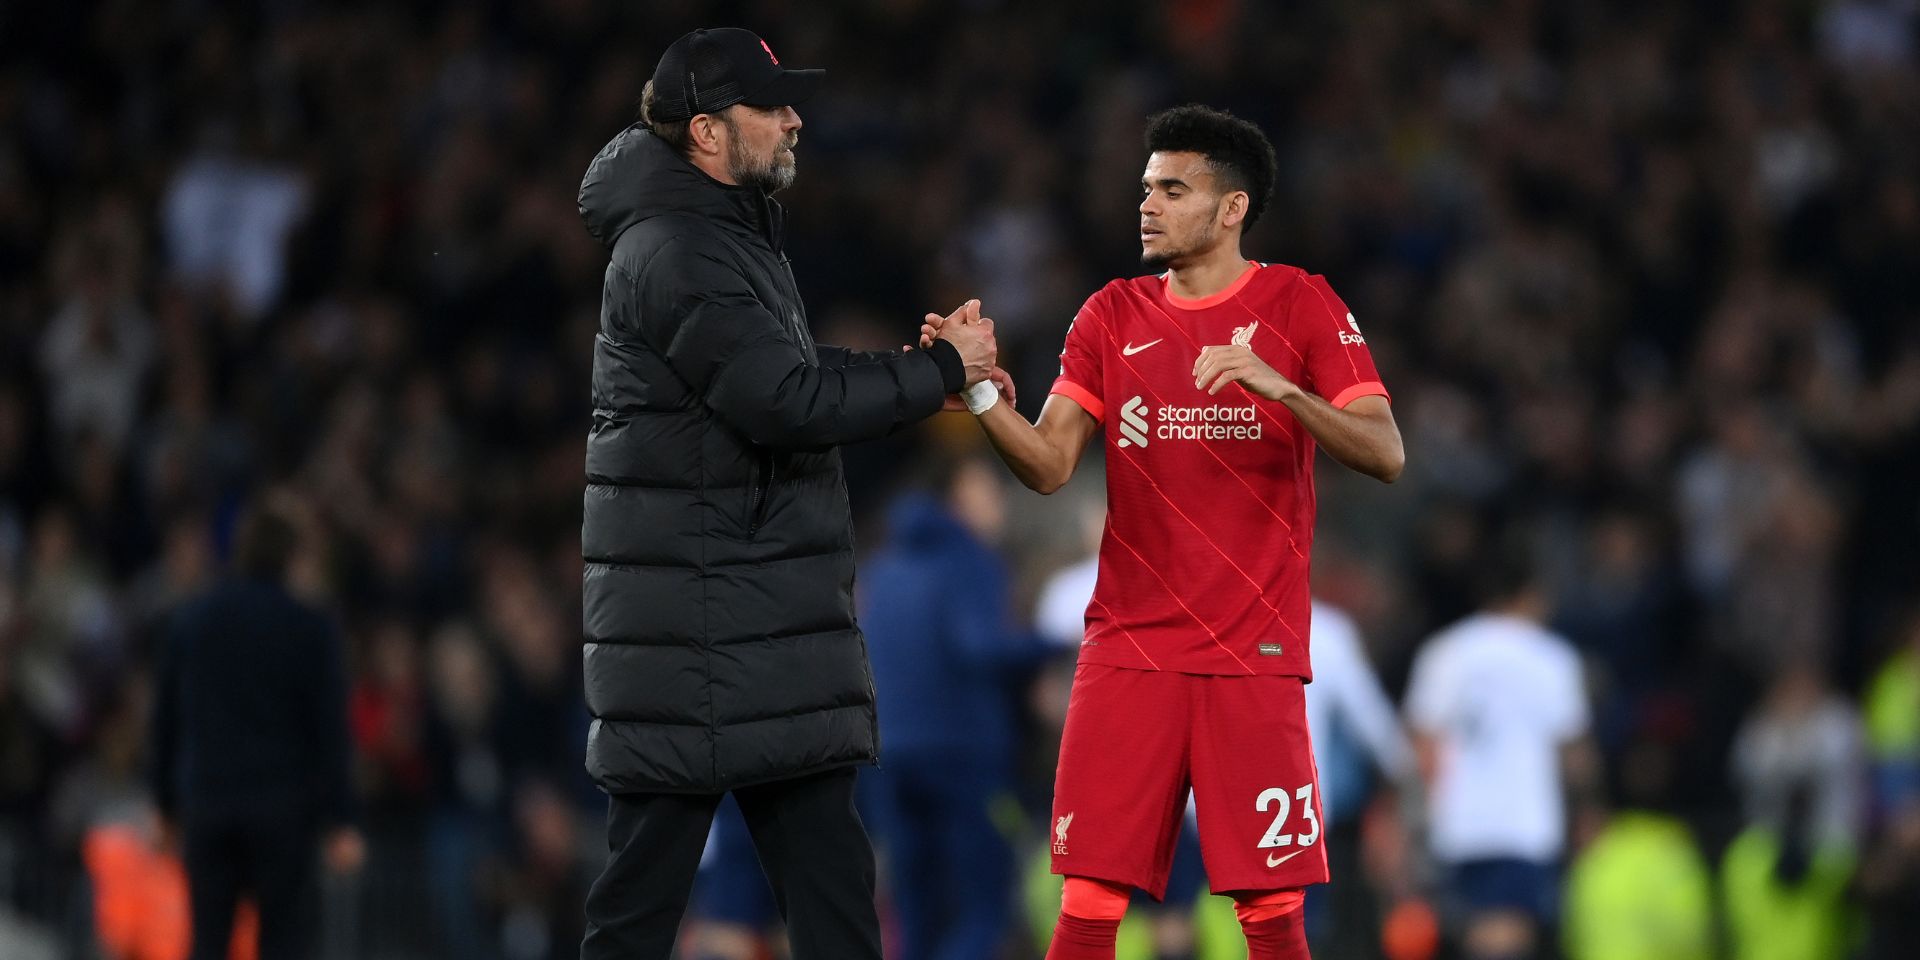 Jurgen Klopp comments on whether he’s worried about the number of goals that Luis Diaz has scored for Liverpool